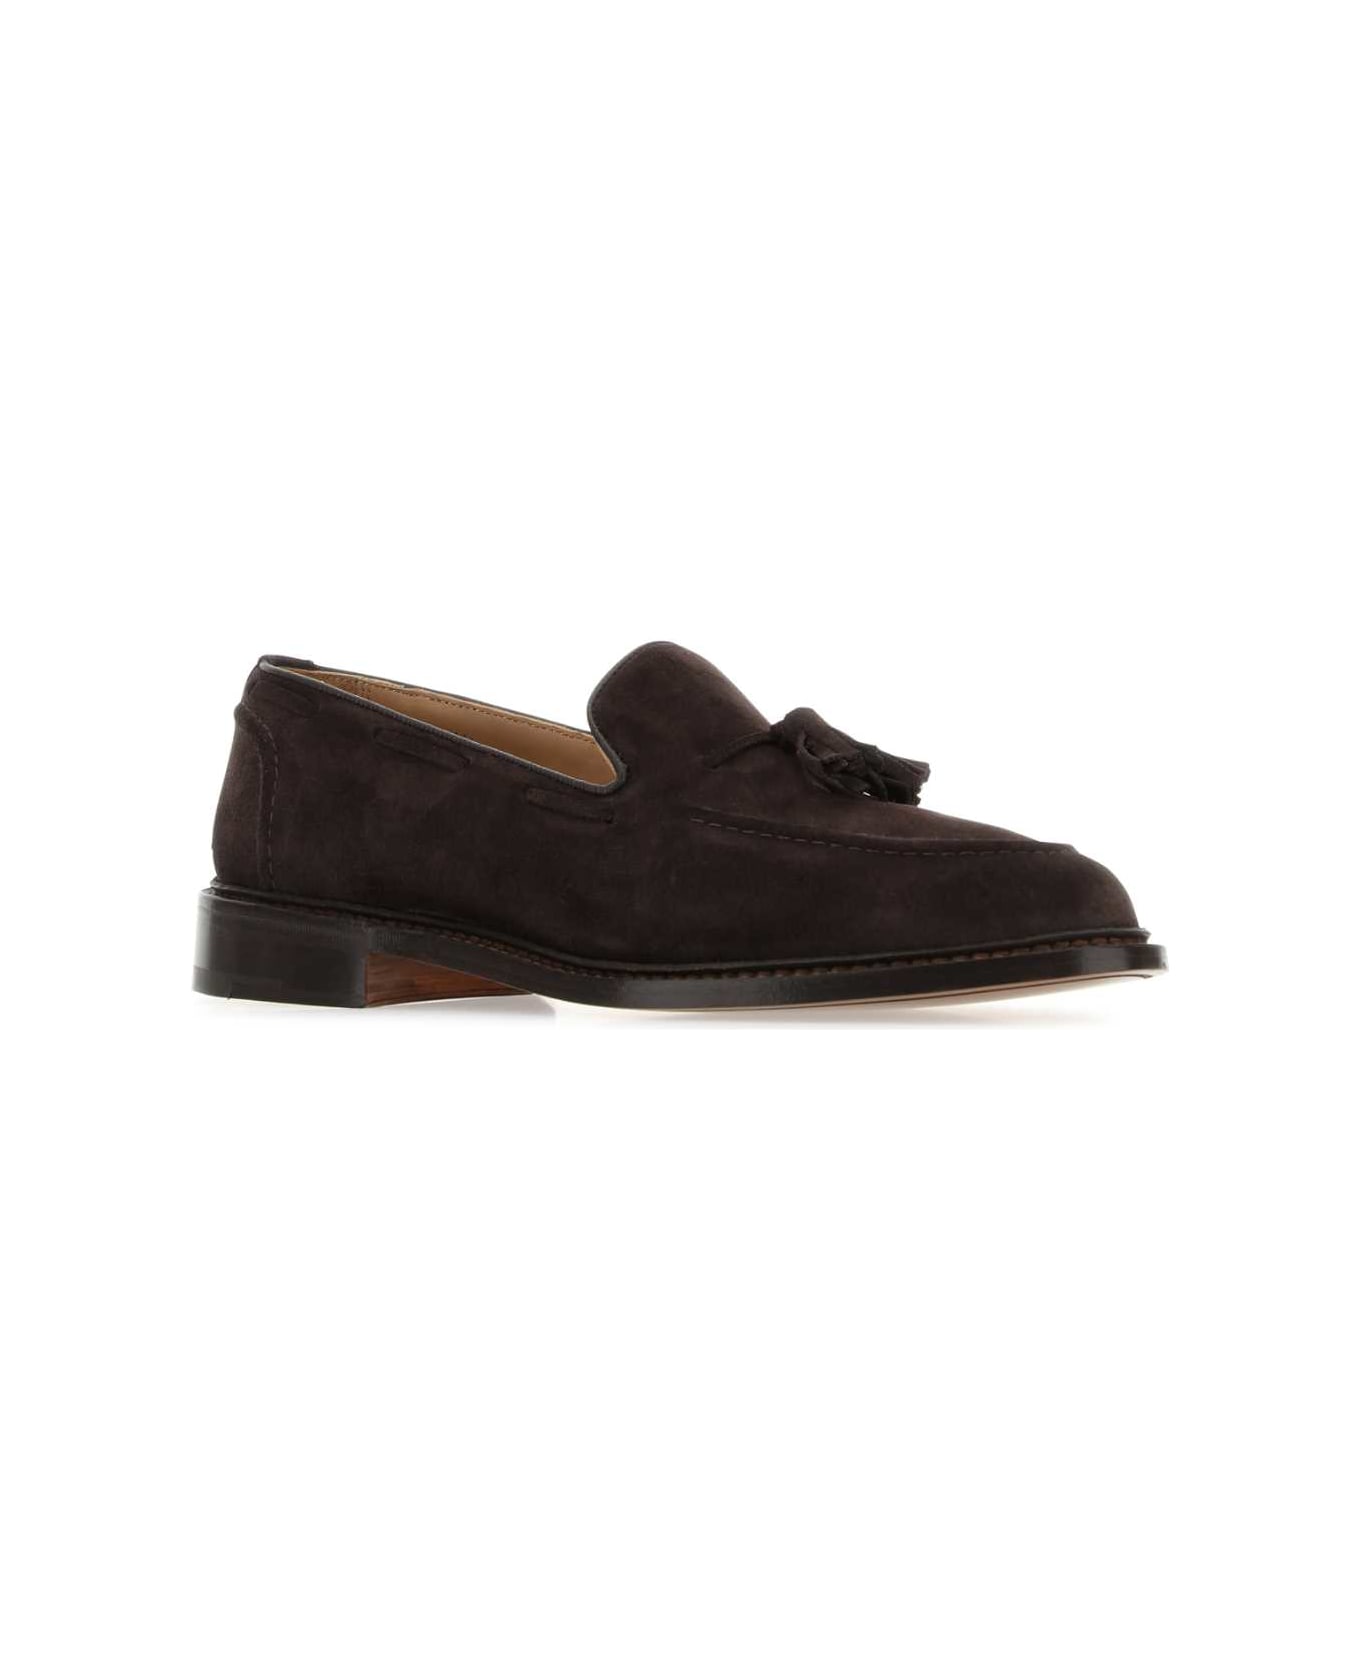 Tricker's Brown Suede Elton Loafers - COFFEE